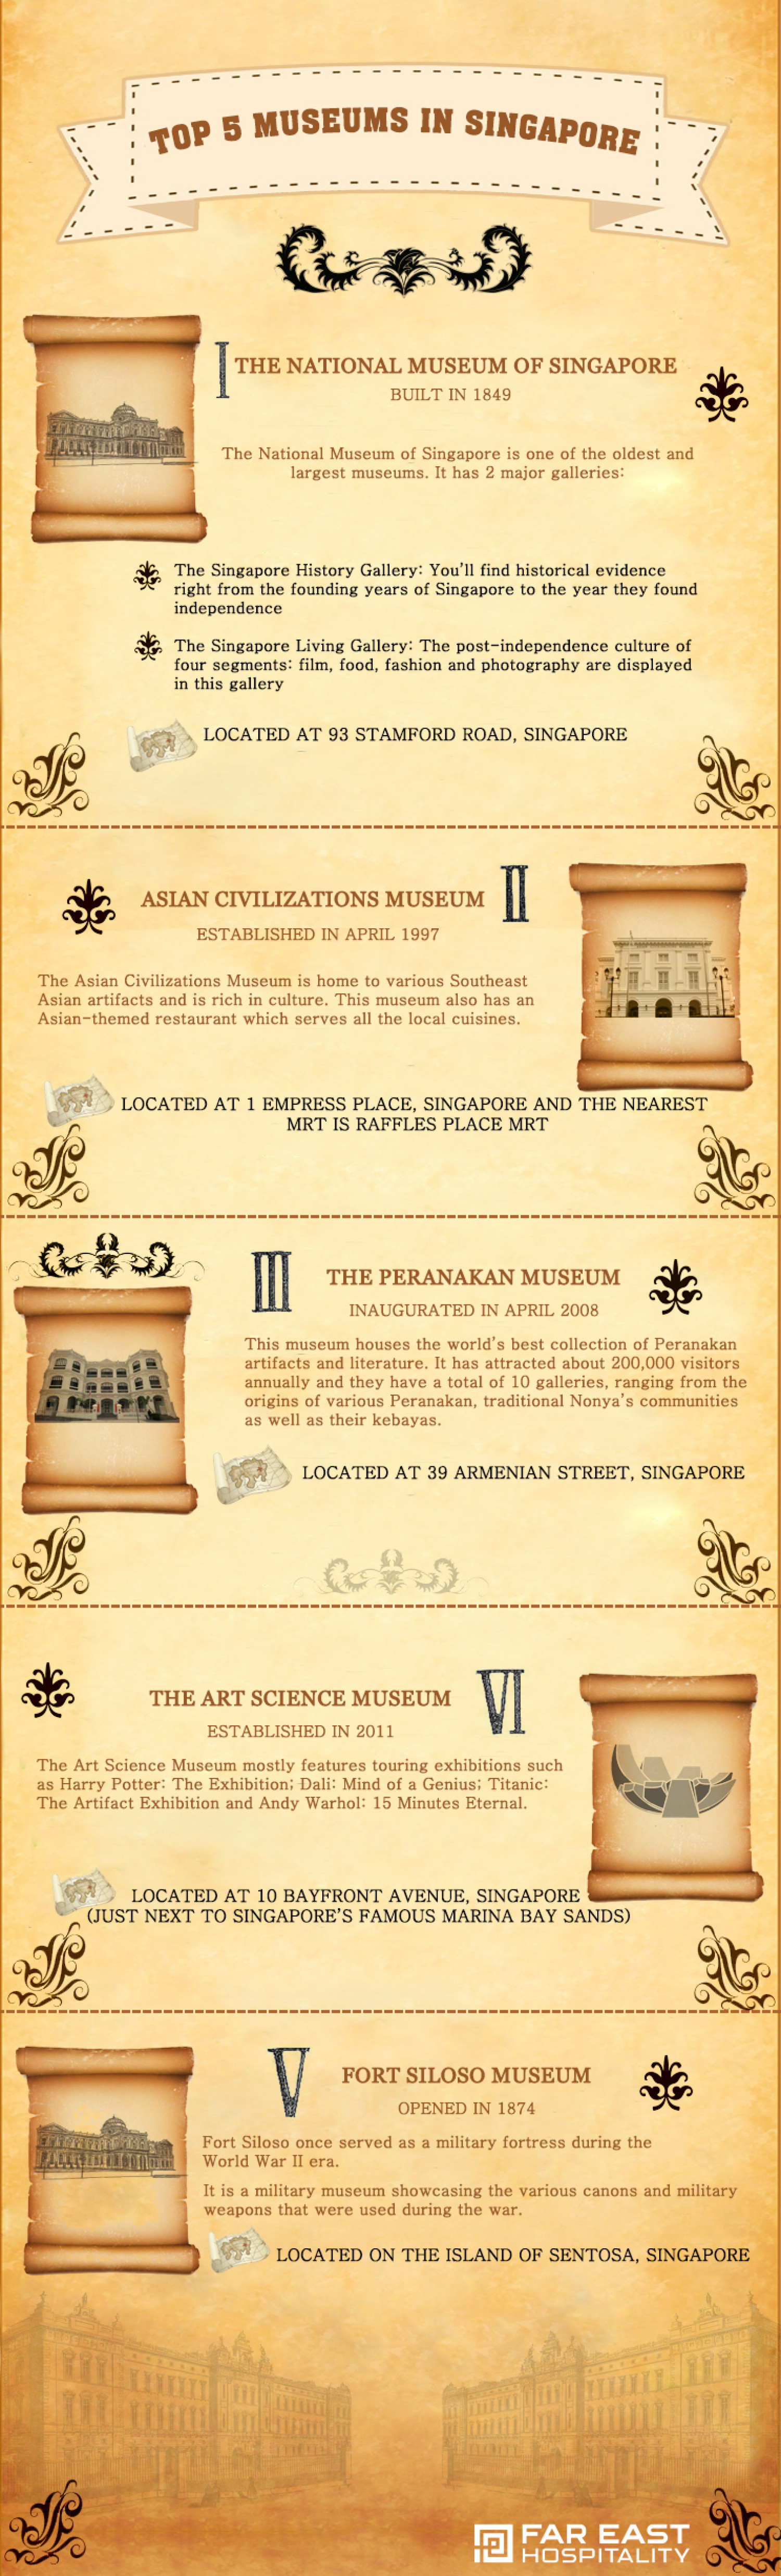 Top 5 Museums In Singapore  Infographic